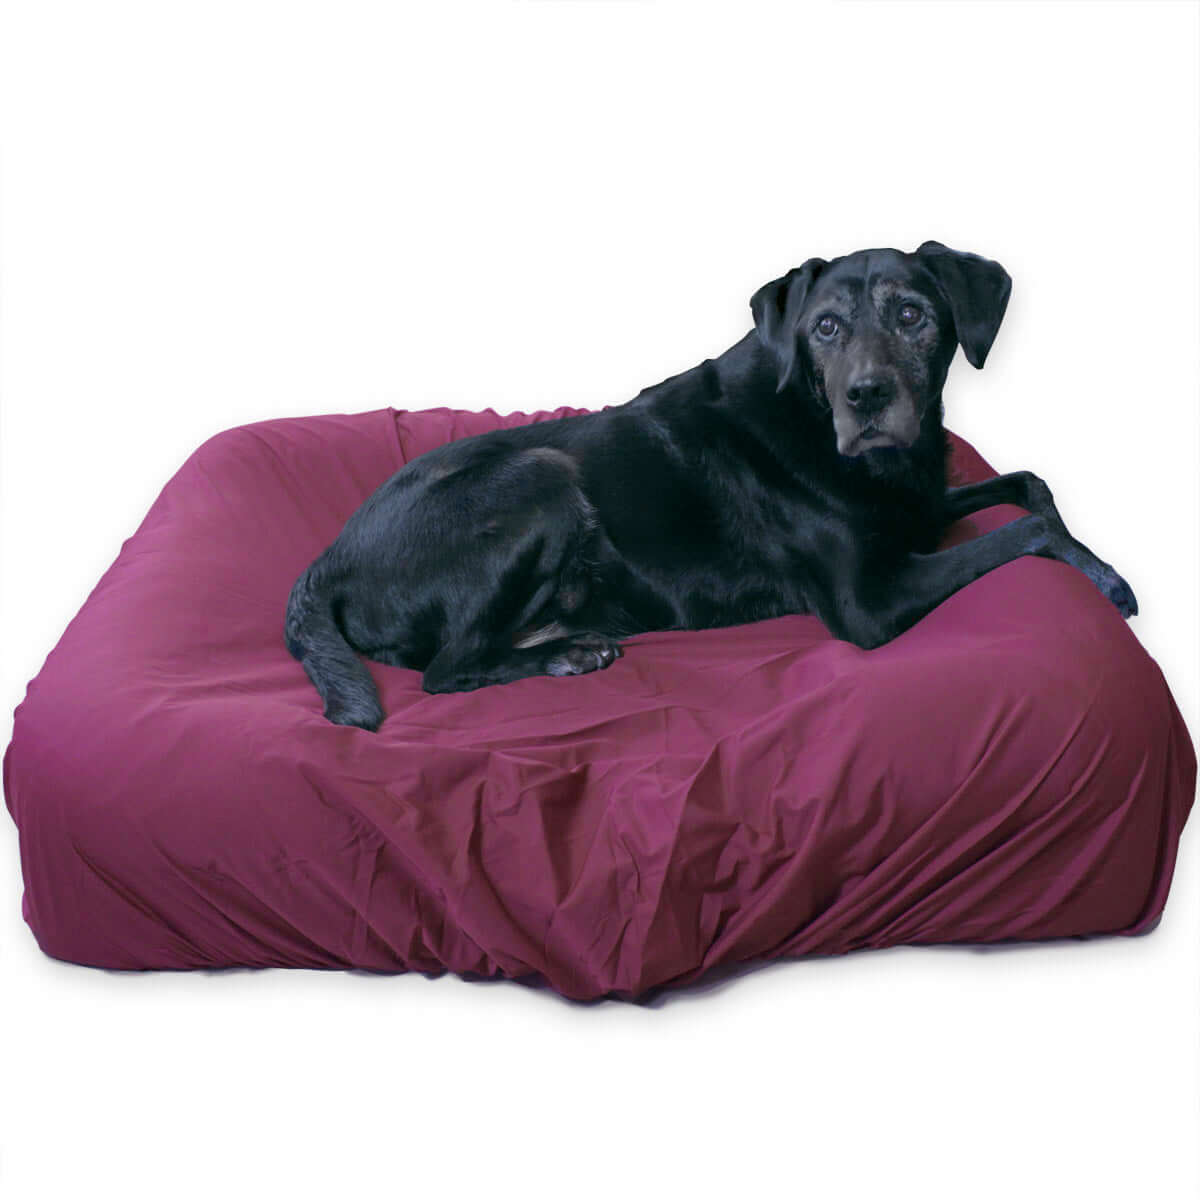 Burgundy Elastic Fitted Dog Bed Cover